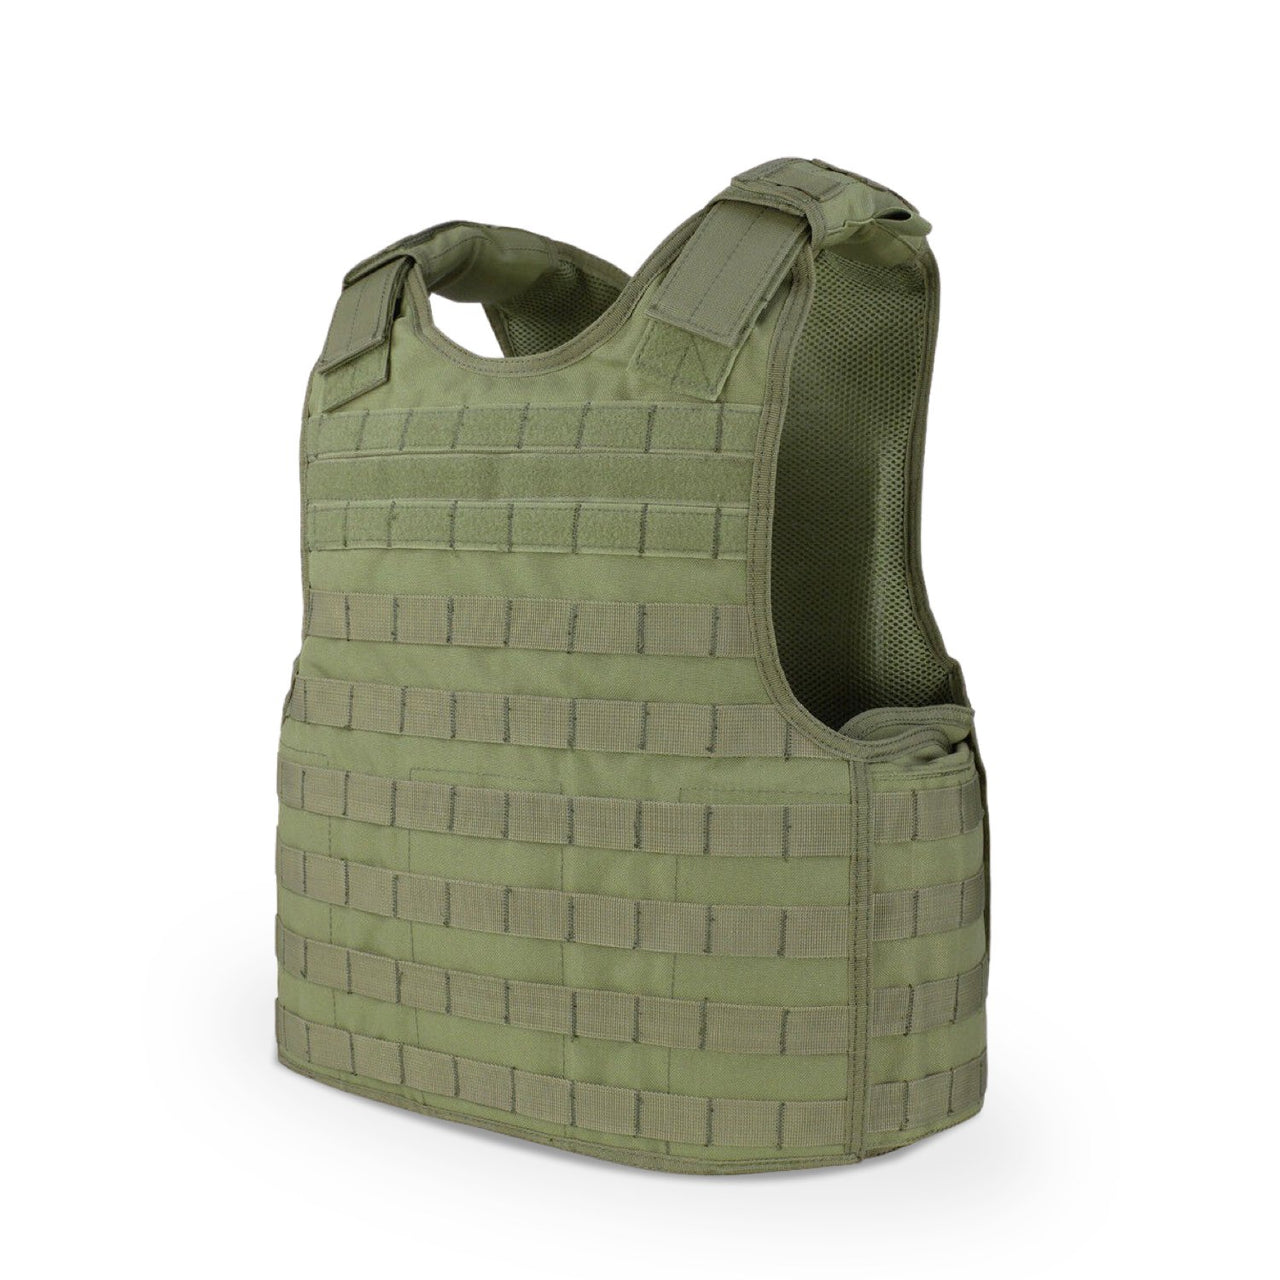 A Body Armor Direct Defender Tactical Multi-Threat Soft Armor Vest & Plate Carrier in One on a white background.